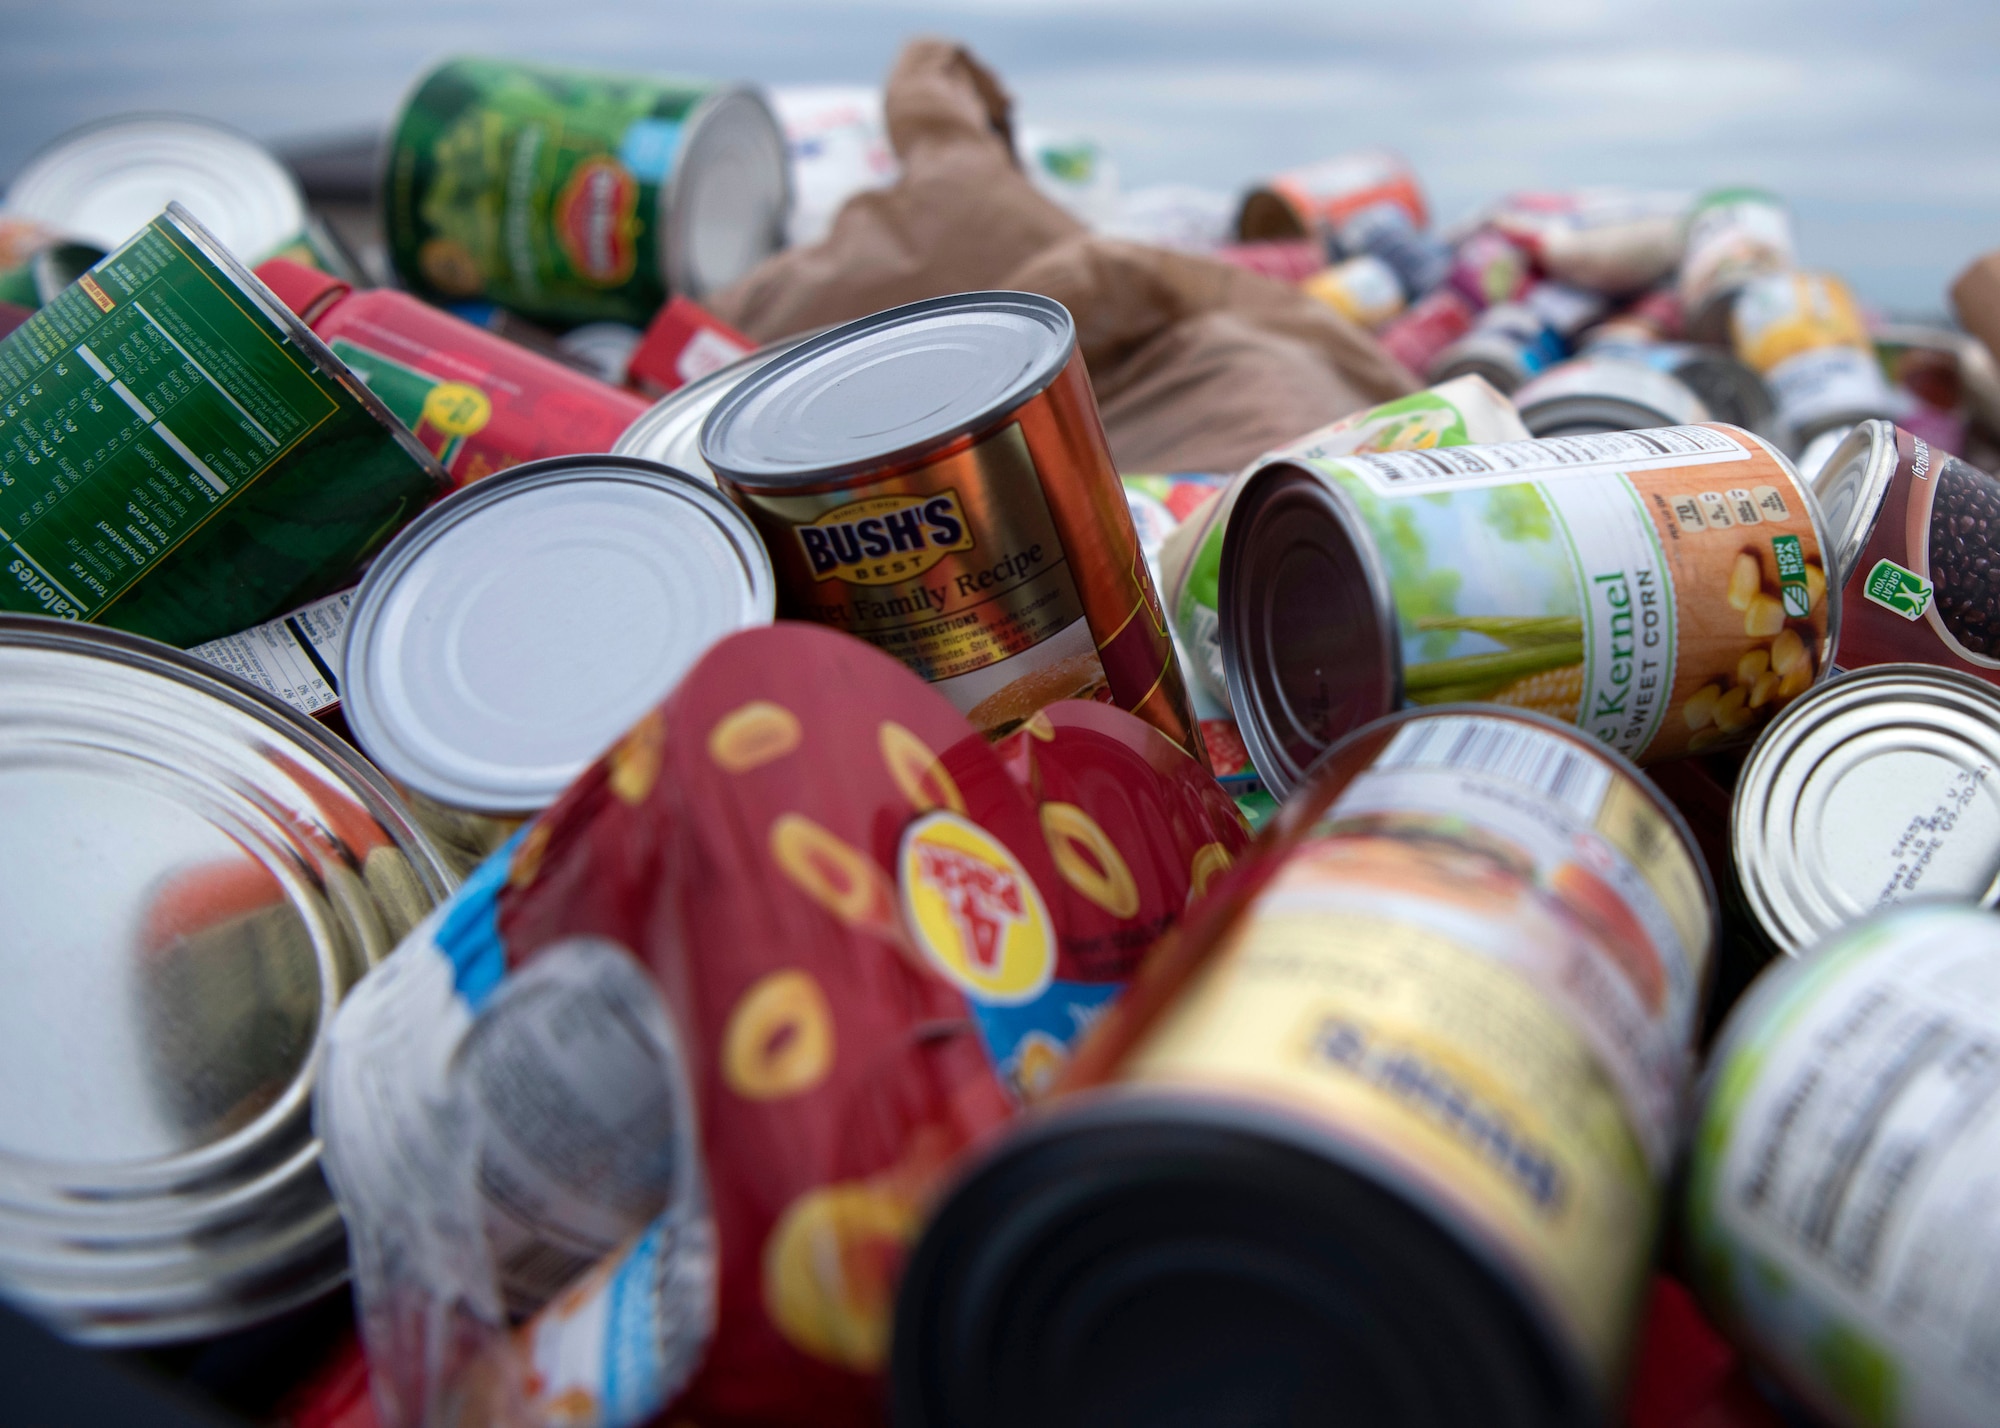 Canned food donations are piled in a truck bed ready to be packed into rucksacks at the Jacobson Ruck March on Goodfellow Air Force Base, Texas, Sept. 28, 2020. Each member brought a canned food donation for the food bank and filled their rucksacks with the cans to add weight. (U.S. Air Force photo by Airman 1st Class Michael Bowman)